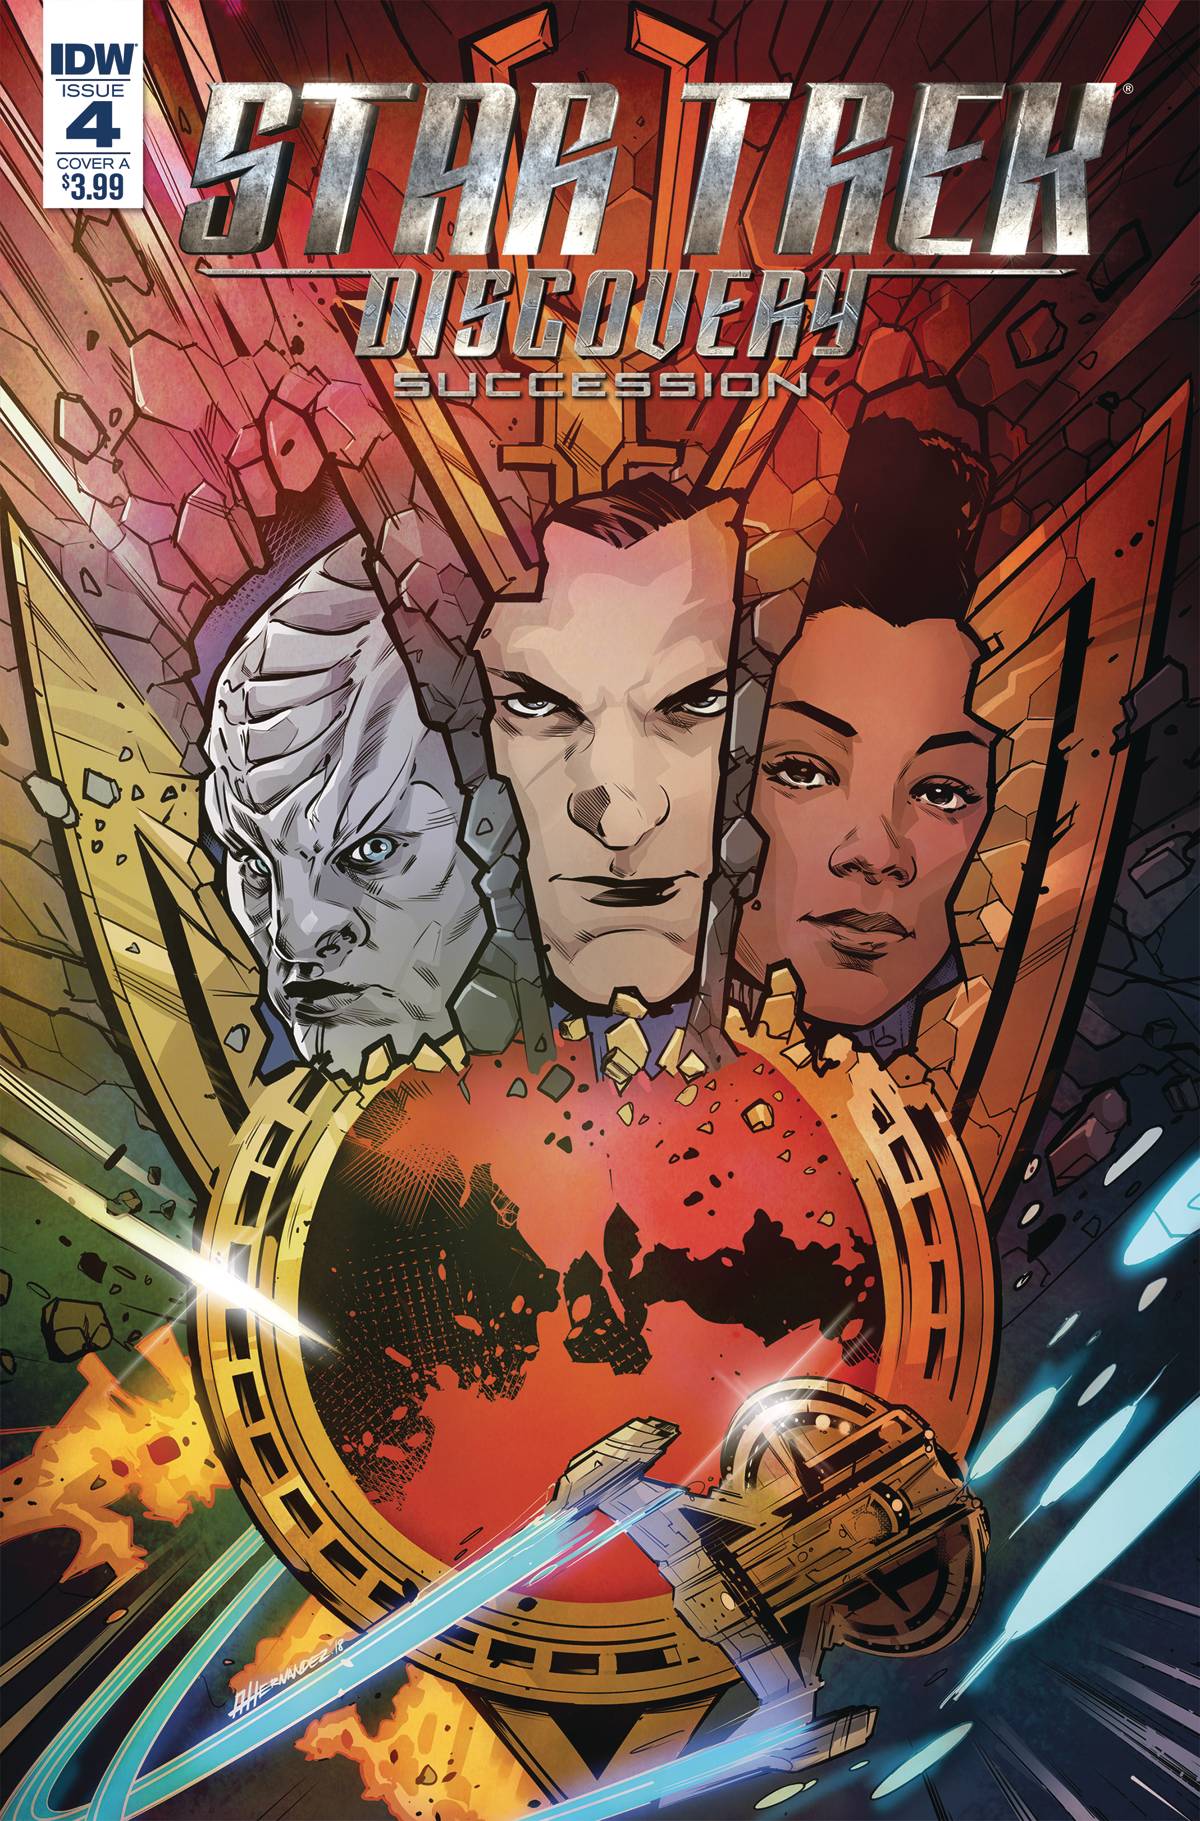 Star Trek Discovery Succession #4 Cover A Hernandez